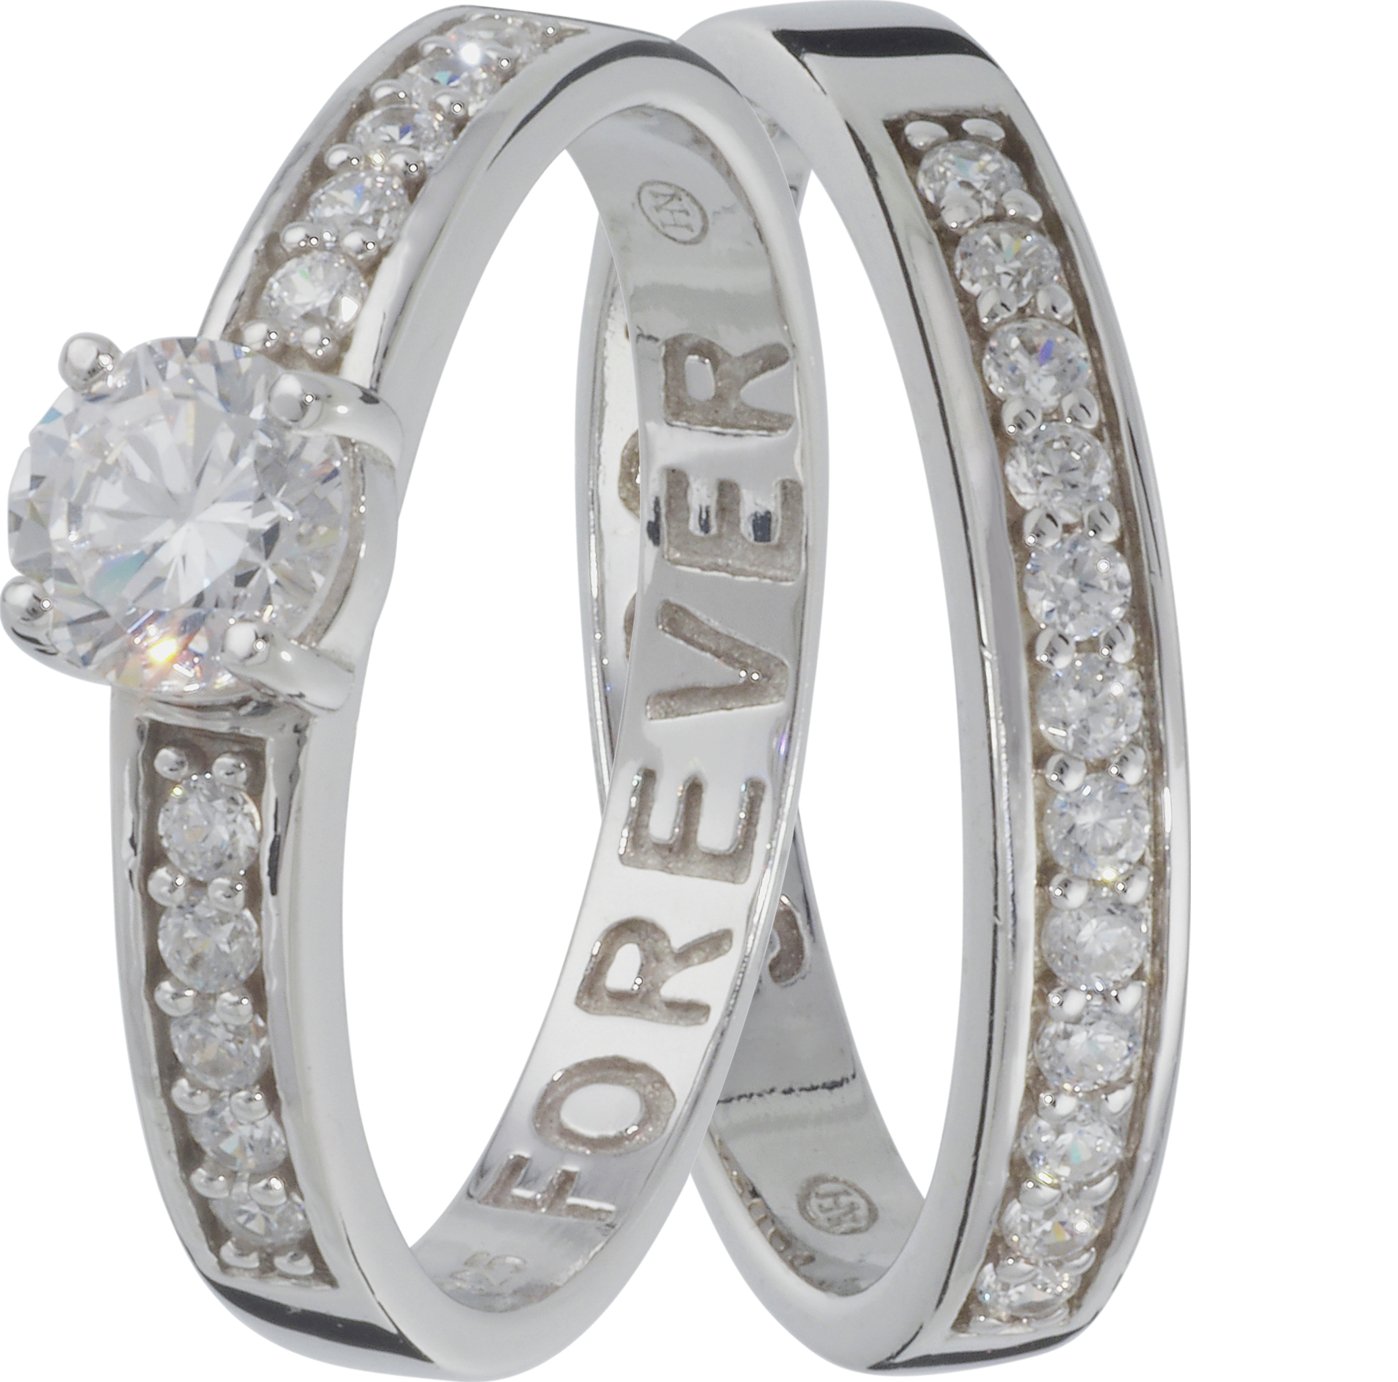 Revere Sterling Silver Eternity Ring Set Review